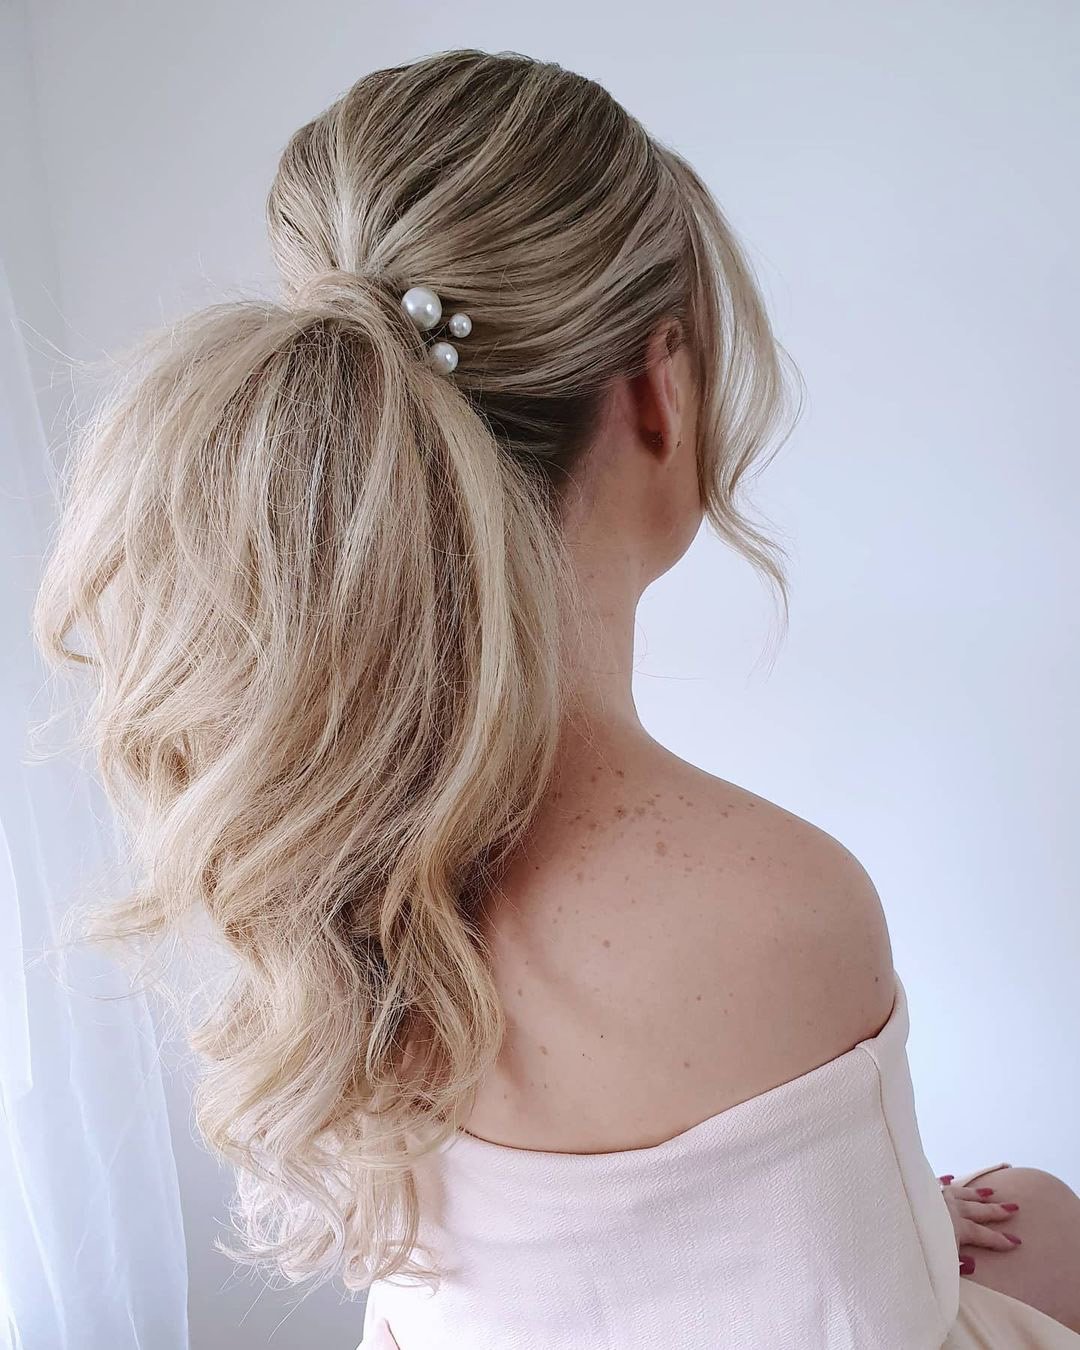 pony tail hairstyles for wedding volume blonde with pearls cathughesxo